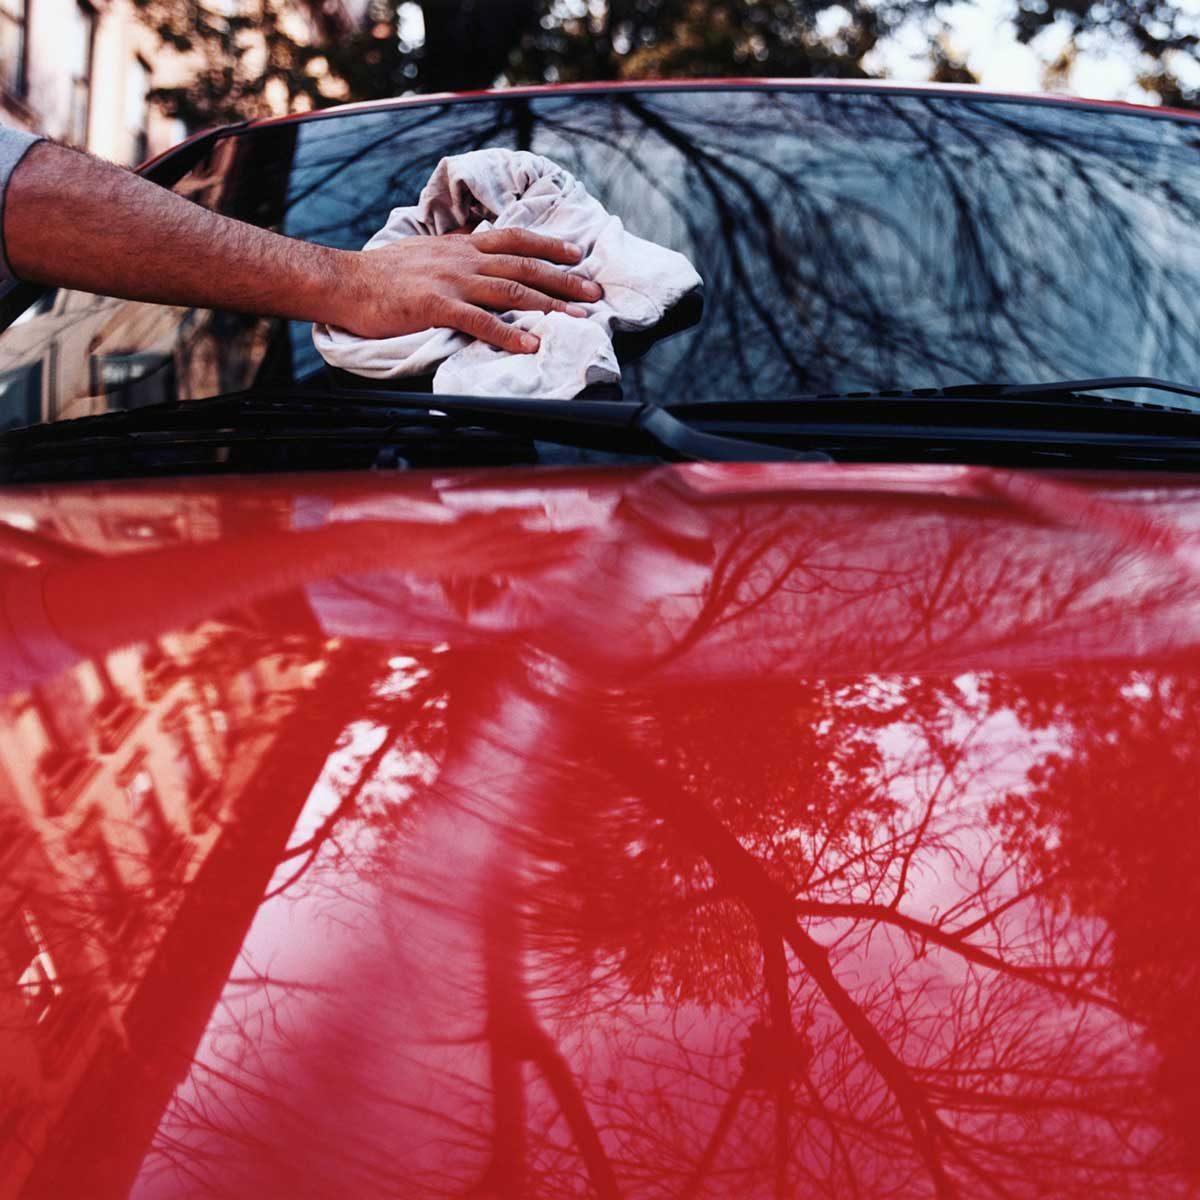 Car Polish vs. Wax: What's the Difference?